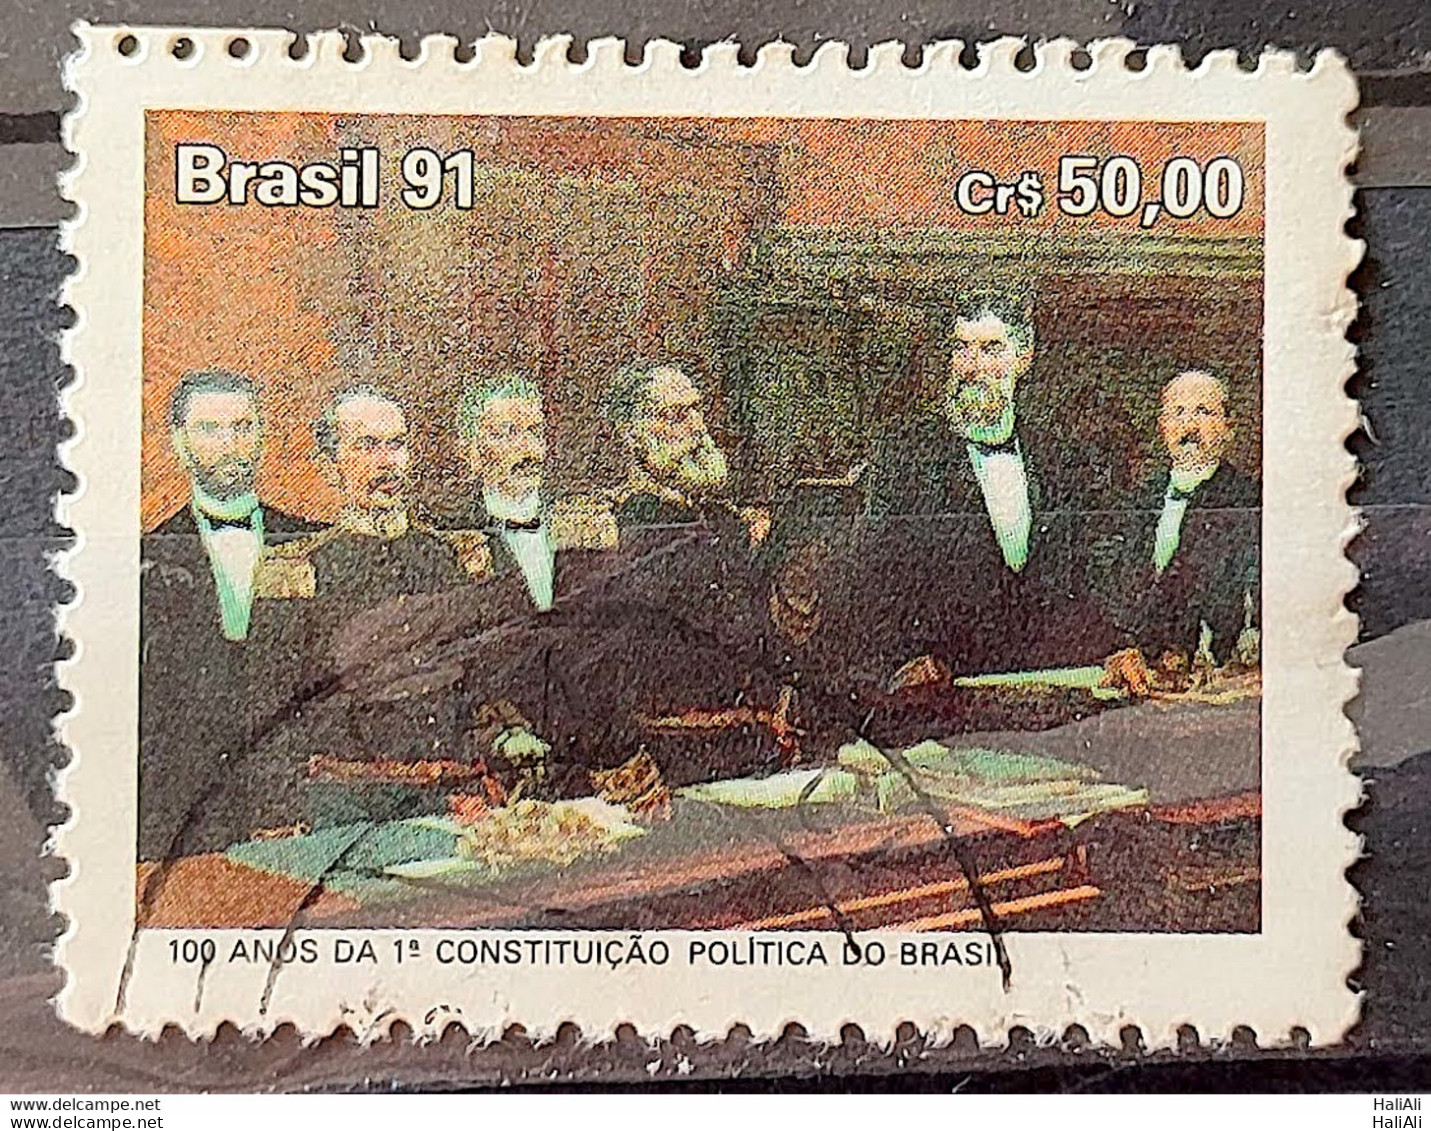 C 1751 Brazil Stamp 100 Years Constituting Political Policy 1991 Circulated 1 - Used Stamps